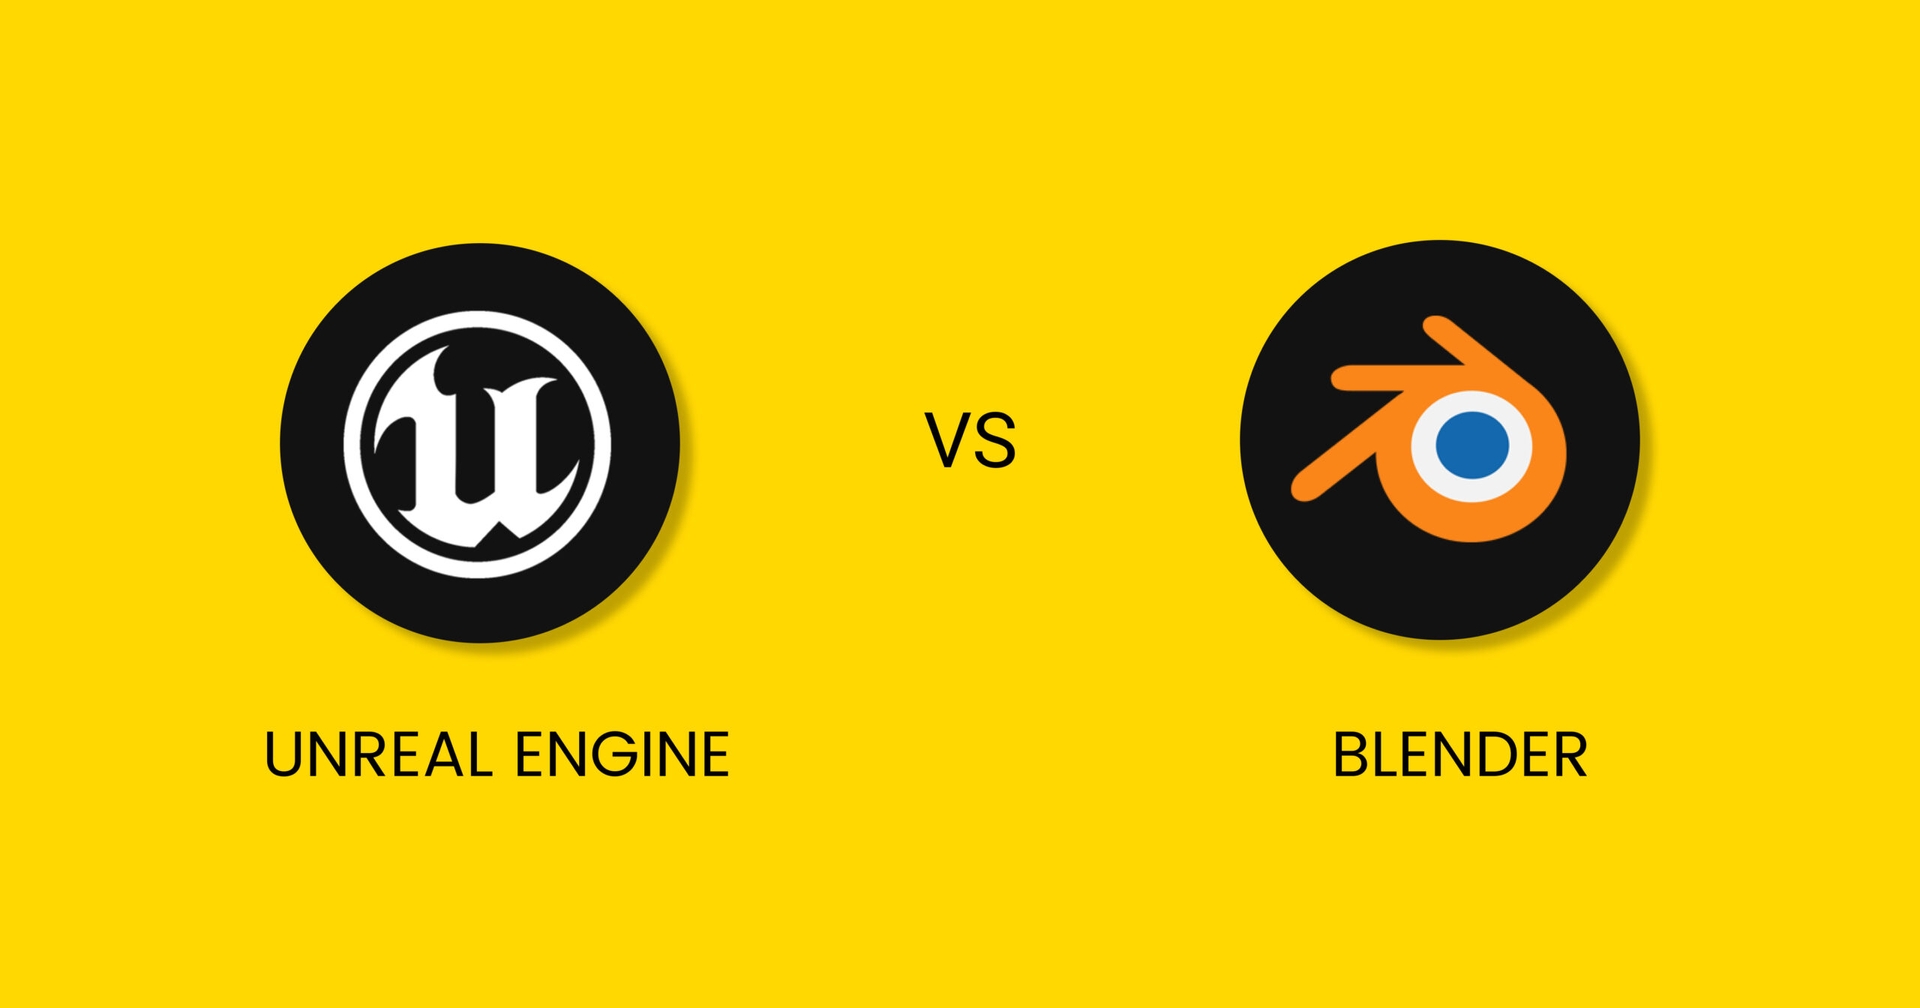 Unreal Engine vs Blender: What are the Key Differences?